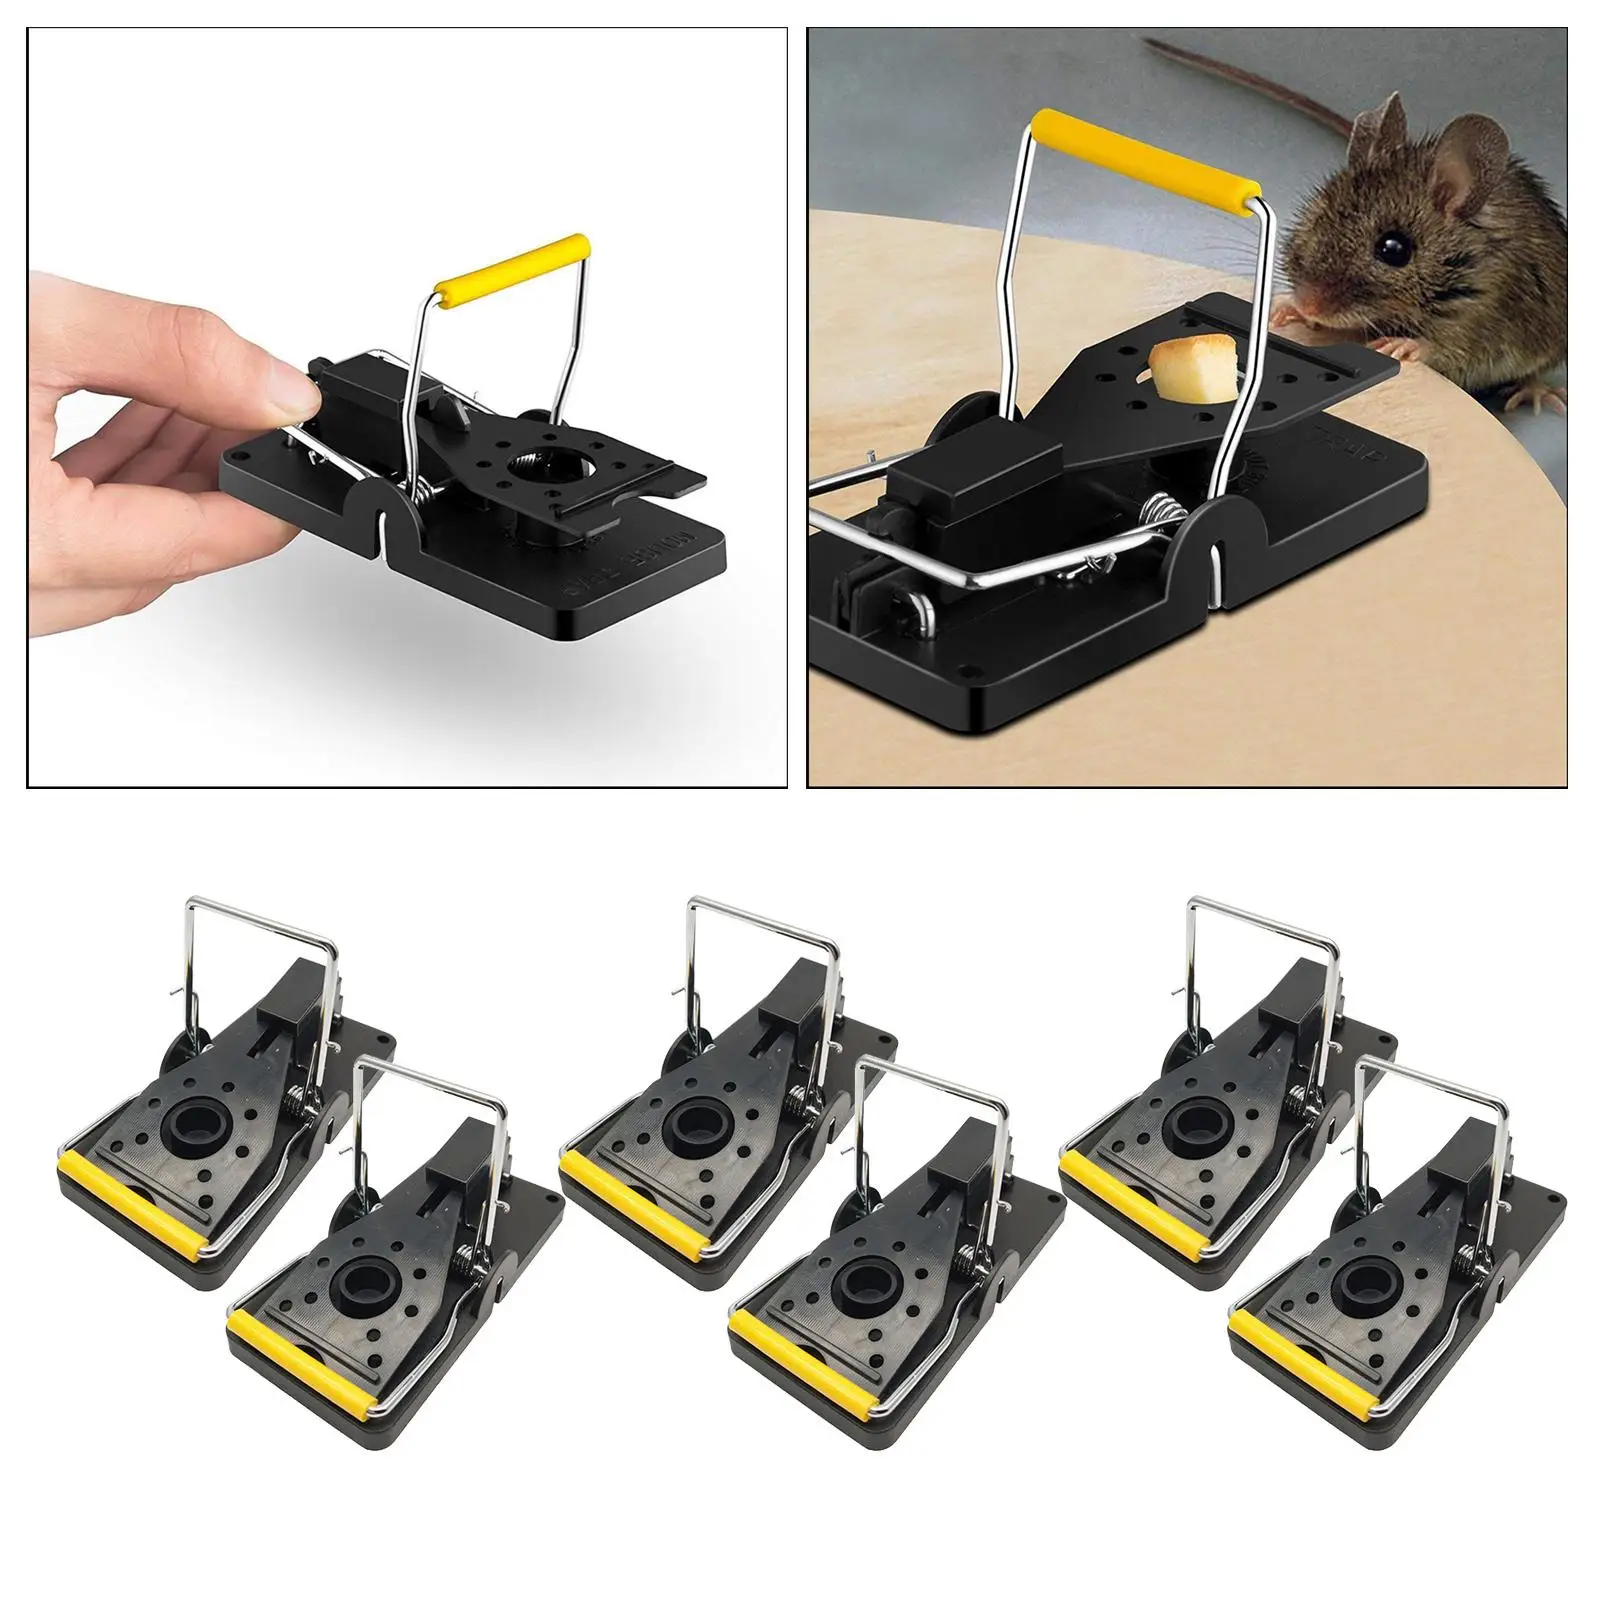 Powerful Mice Traps Instantly Indoor Outdoor Home Pest Control Rat Traps